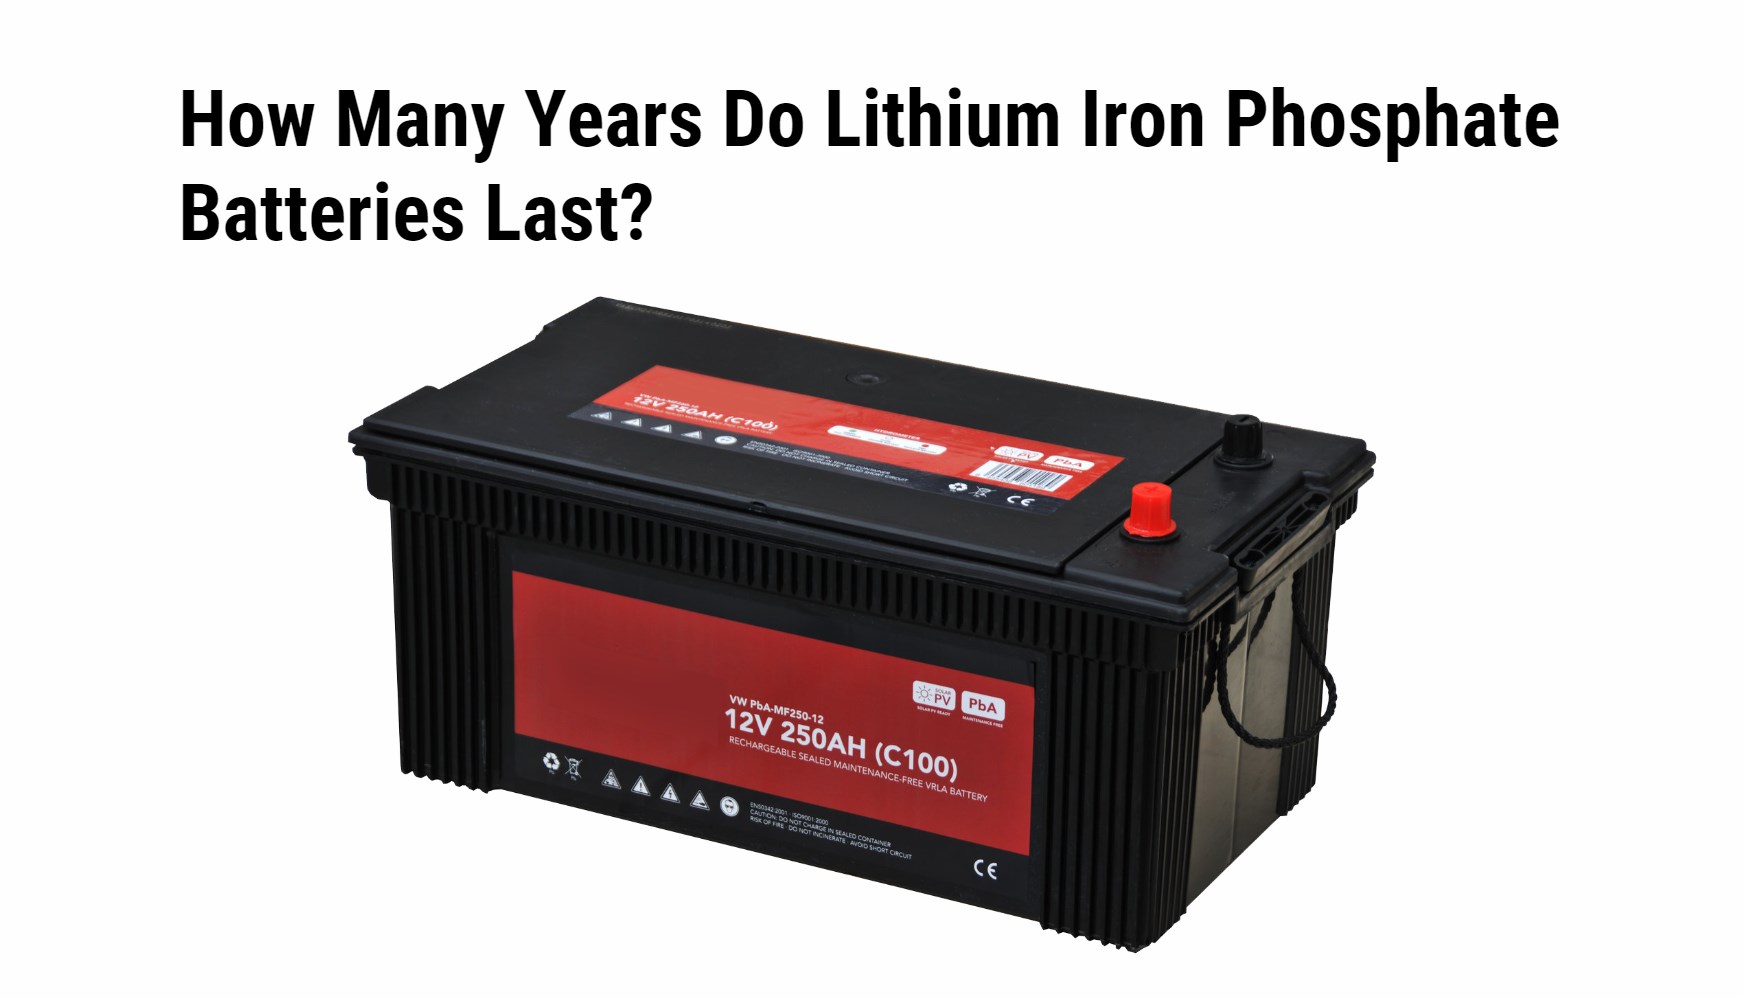 How Many Years Do Lithium Iron Phosphate Batteries Last?